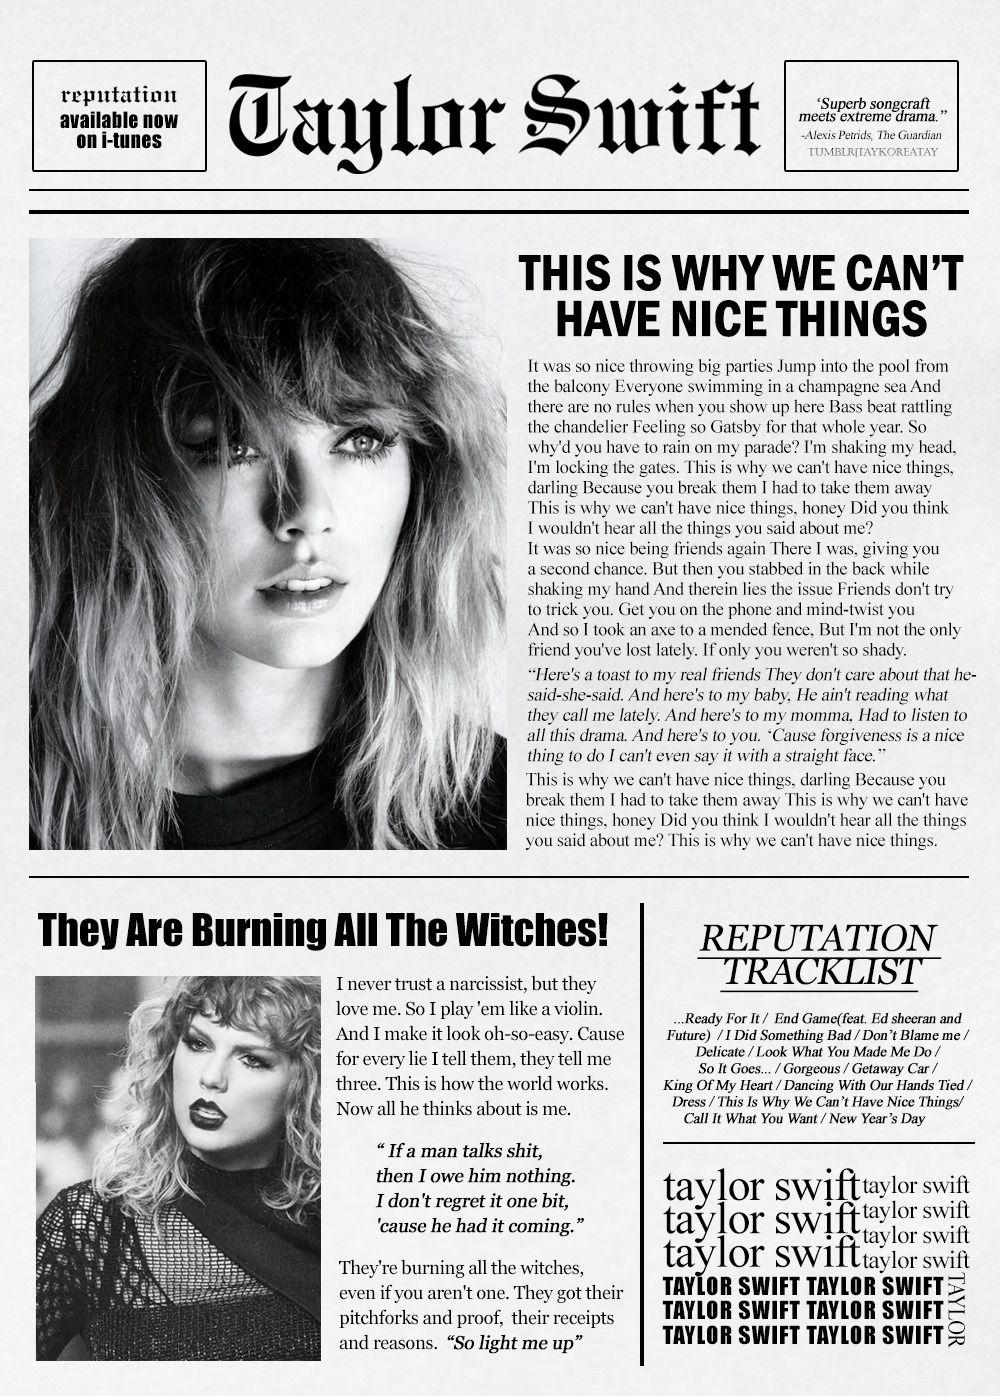 Reputation Are you ready for it?. Taylor swift